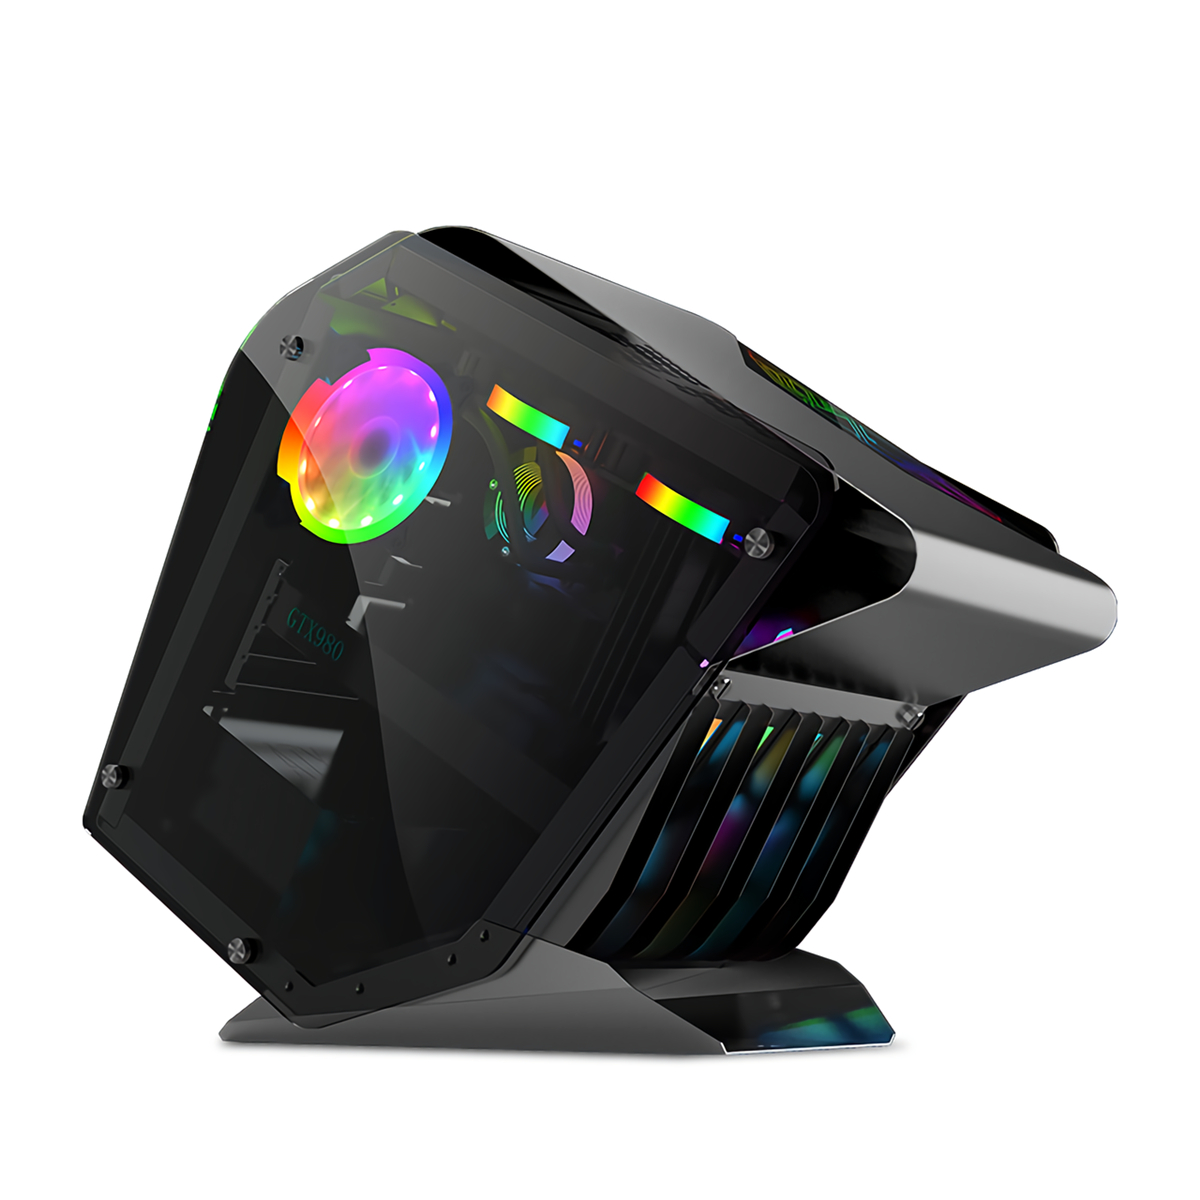 EVESKY-Little-Monster-RGB-Computer-Case-CPU-M-ATX-Water-Cooling-Double-sided-Transparent-Glass-Gamin-1806503-7